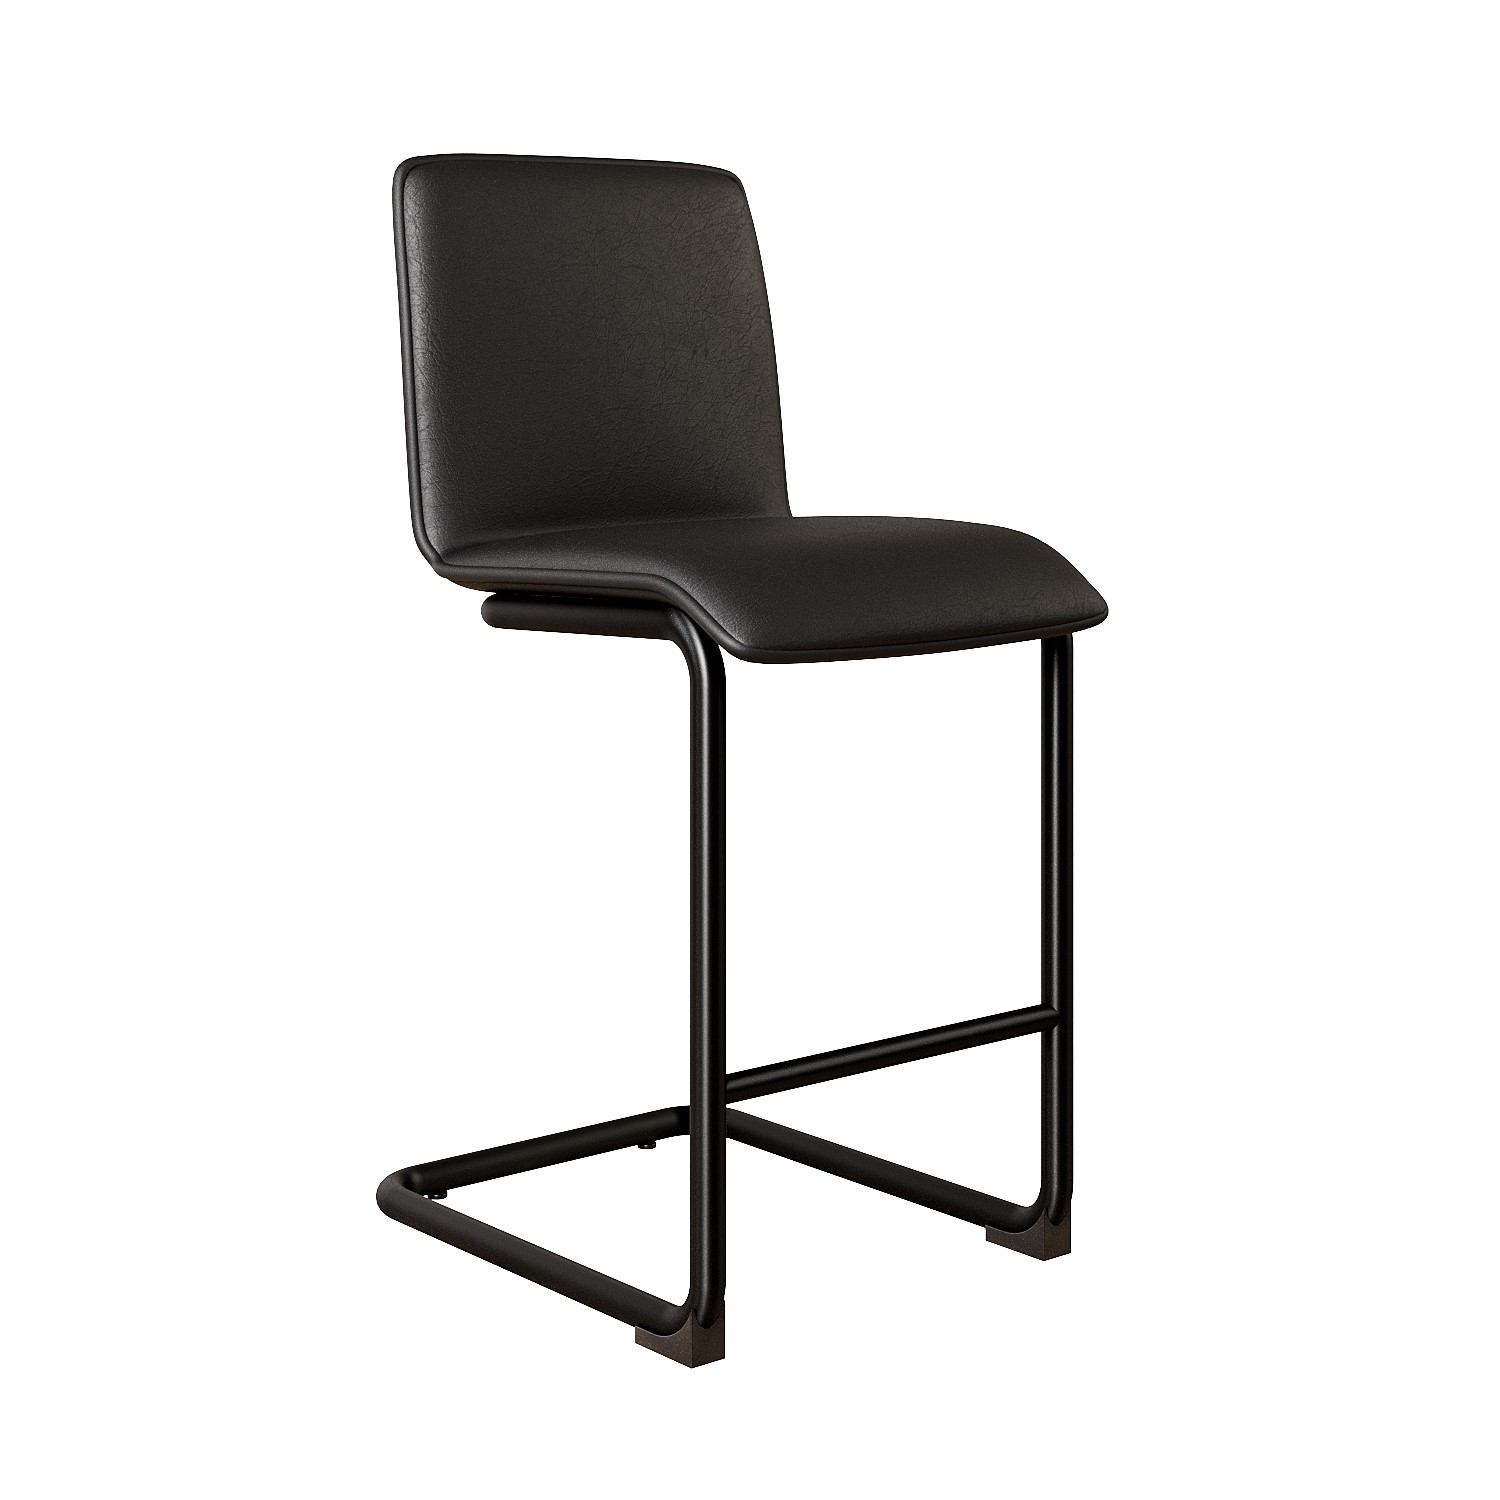 Photo of Black faux leather cantilever kitchen stool with back - 66cm - lucas